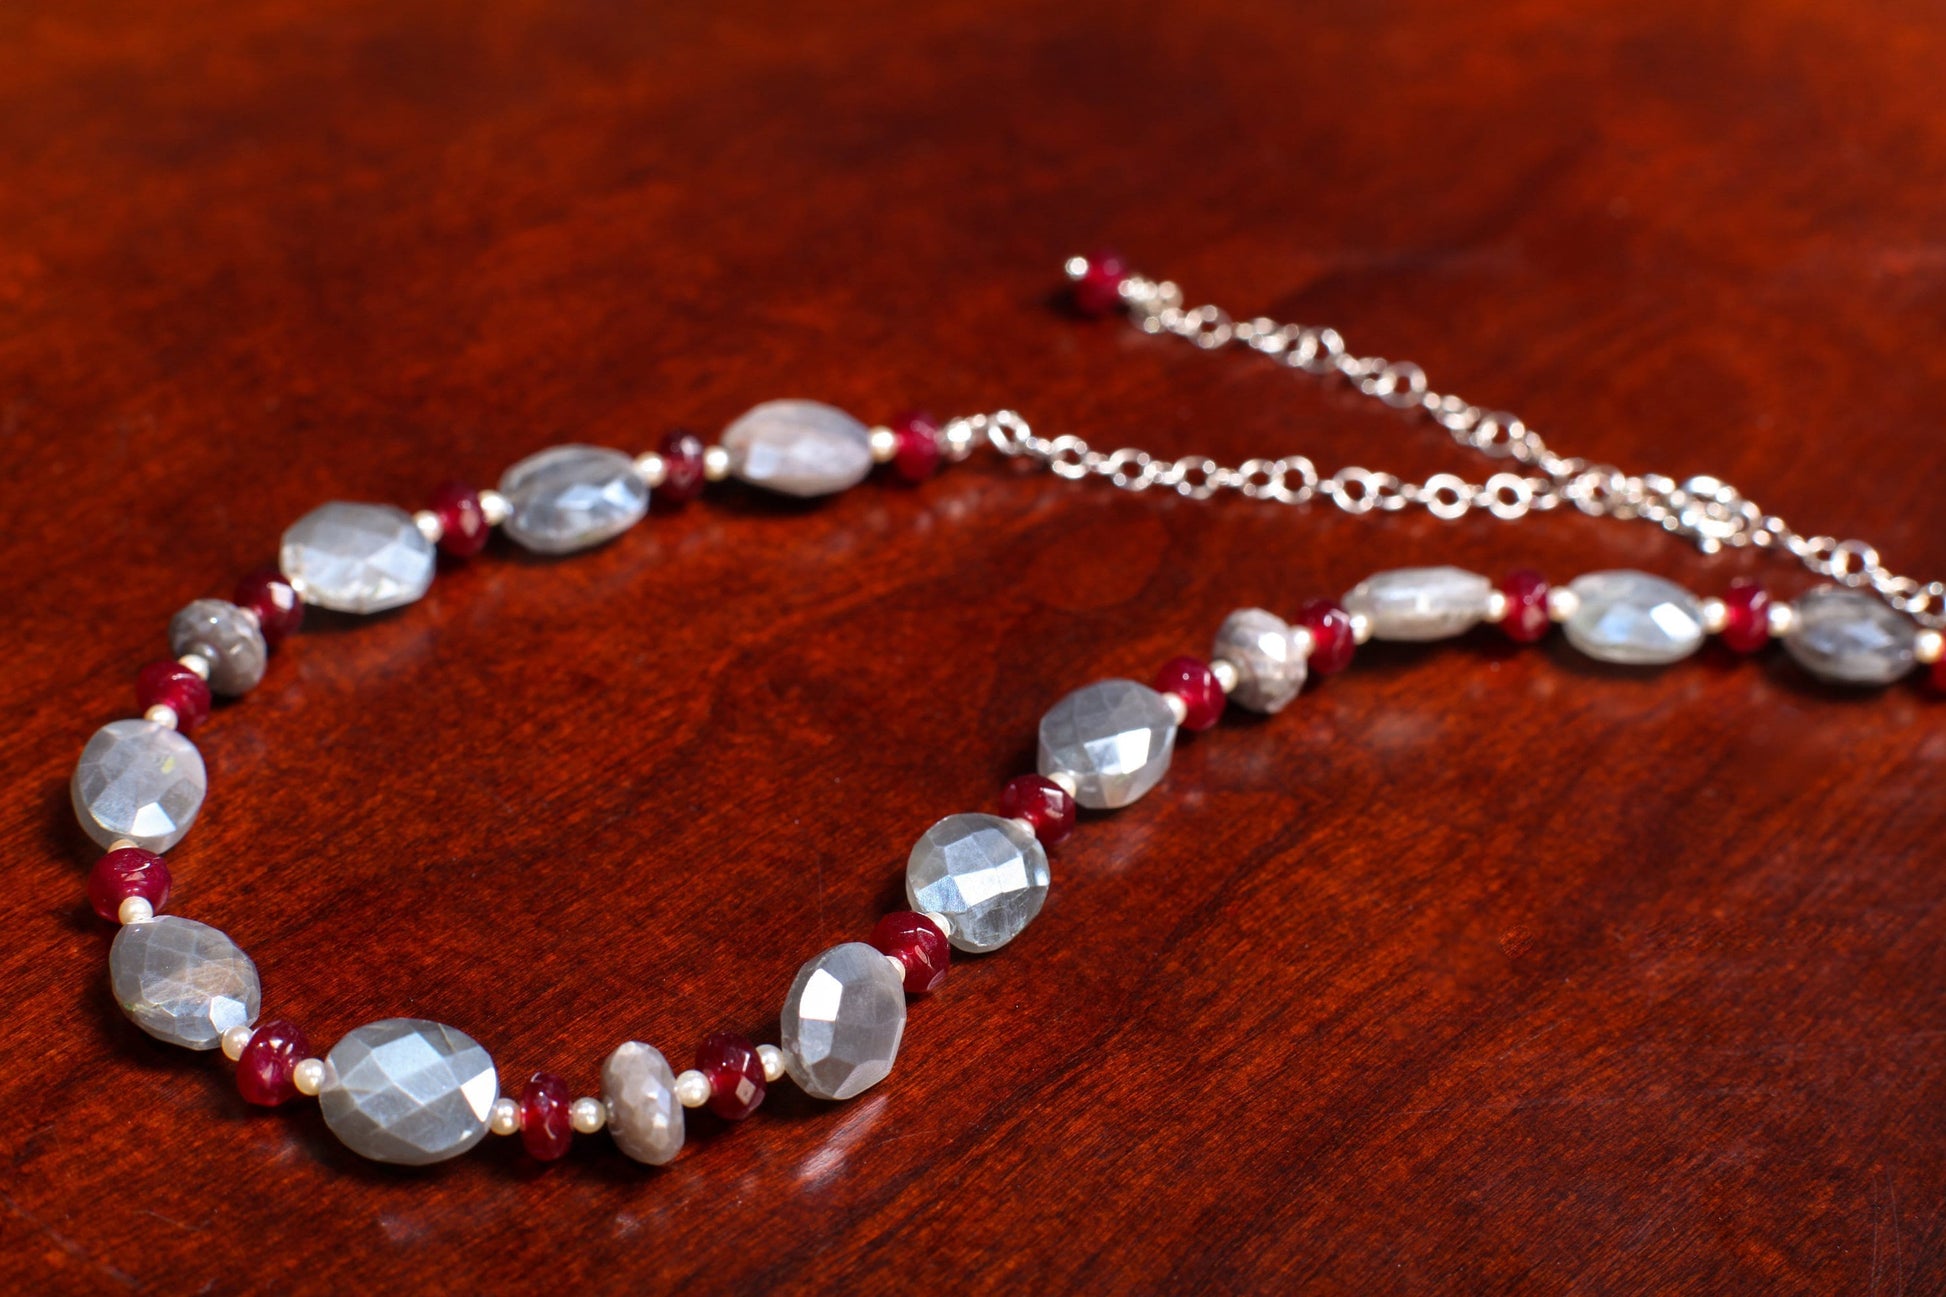 Natural Gray Moonstone Faceted Oval 10x12mm Necklace Accent with Garnet Spacer Gemstone Beads in 925 Sterling Silver Chain and Clasp